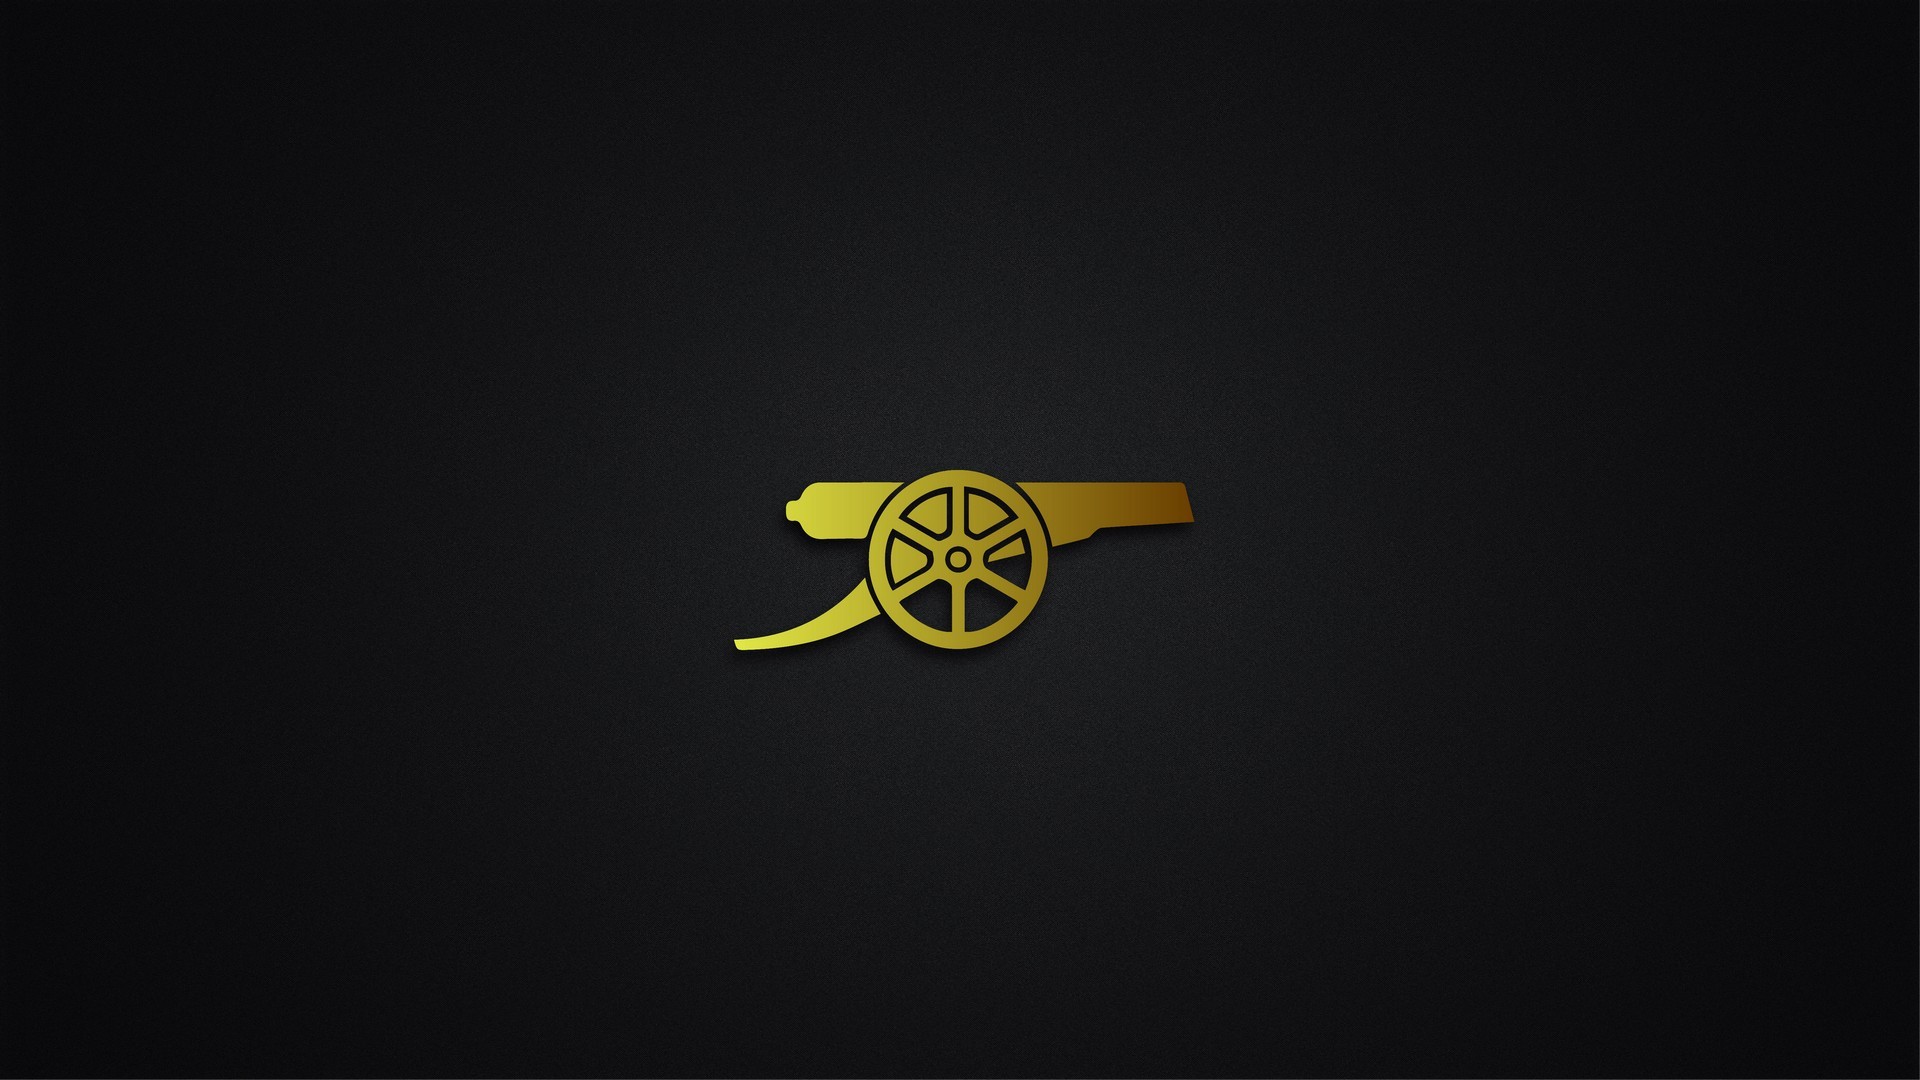 Arsenal HD Wallpapers With Resolution 1920X1080 pixel. You can make this wallpaper for your Mac or Windows Desktop Background, iPhone, Android or Tablet and another Smartphone device for free